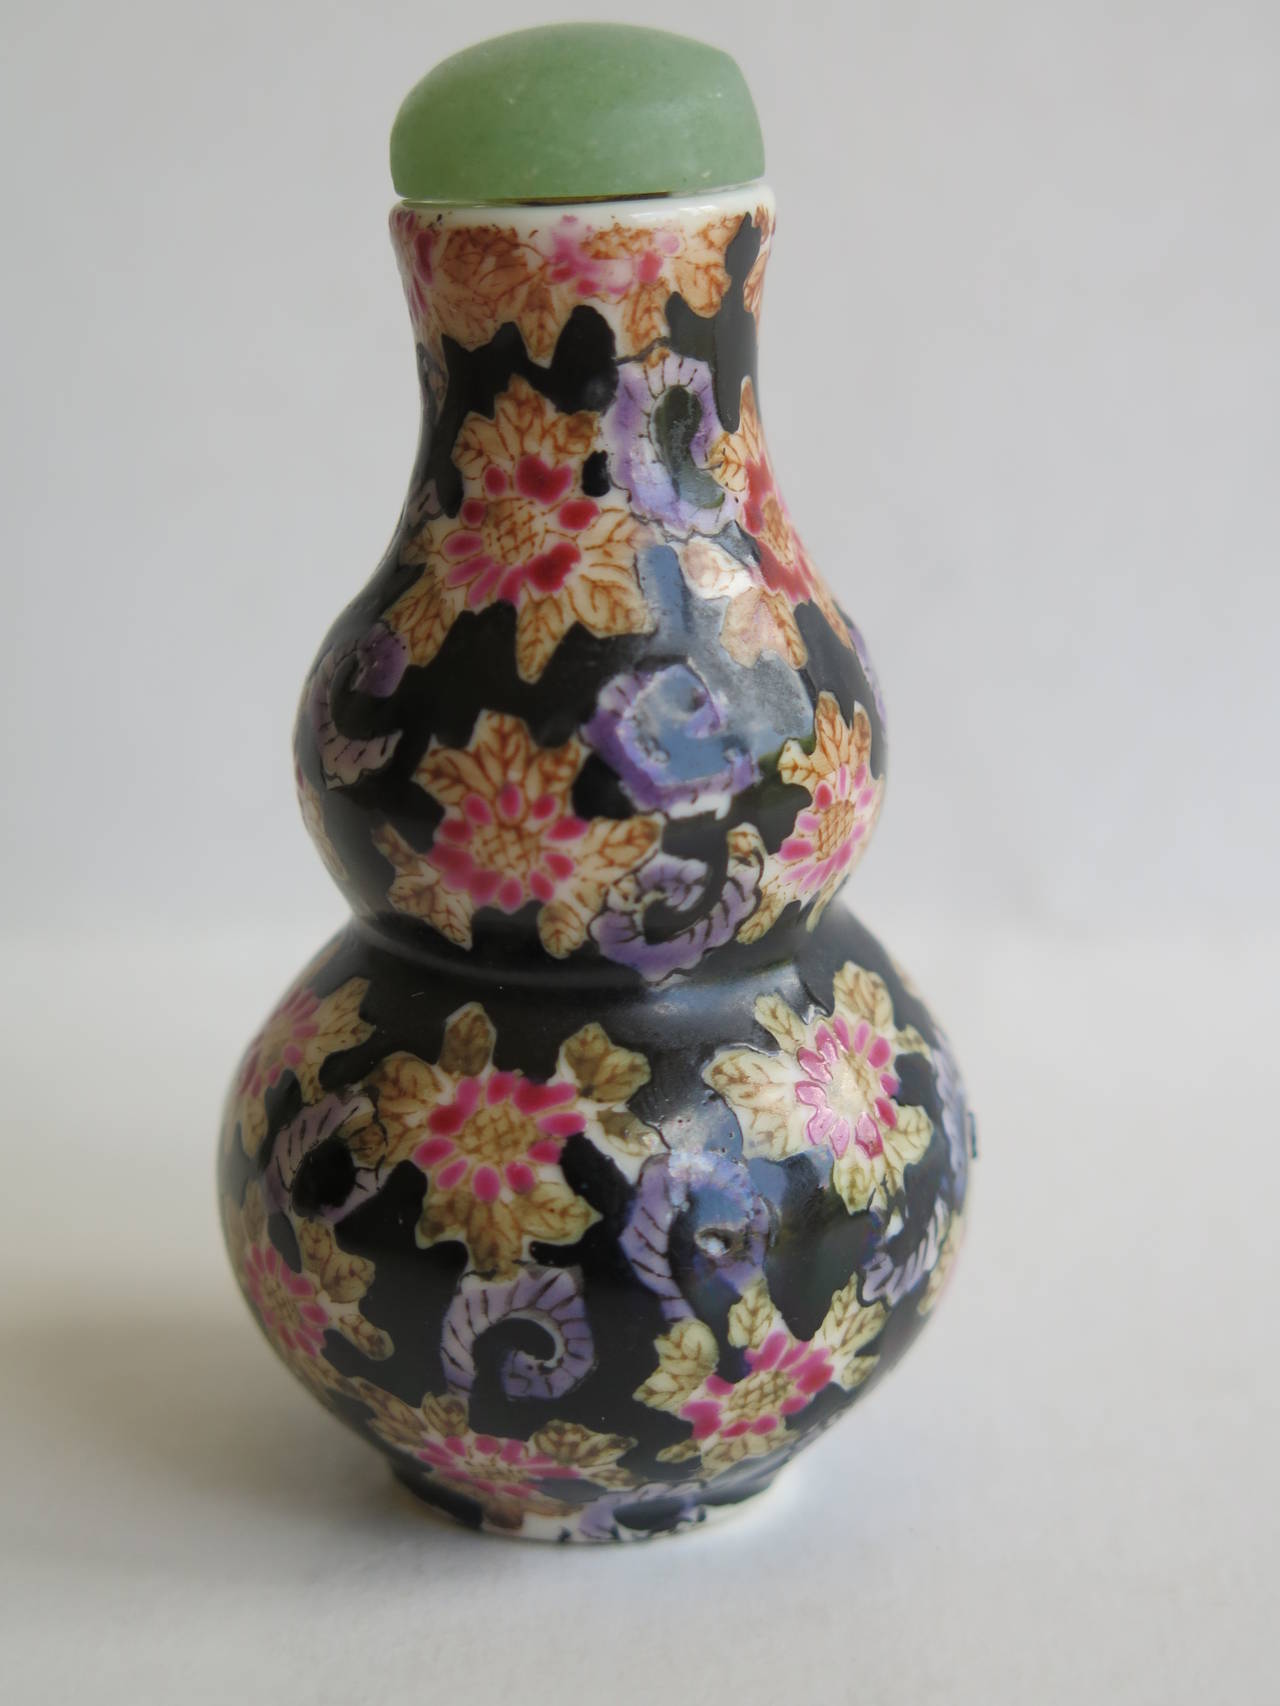 Qing Chinese Snuff Bottle, Porcelain, Hand-Painted, Jade Top, Early 20th Century